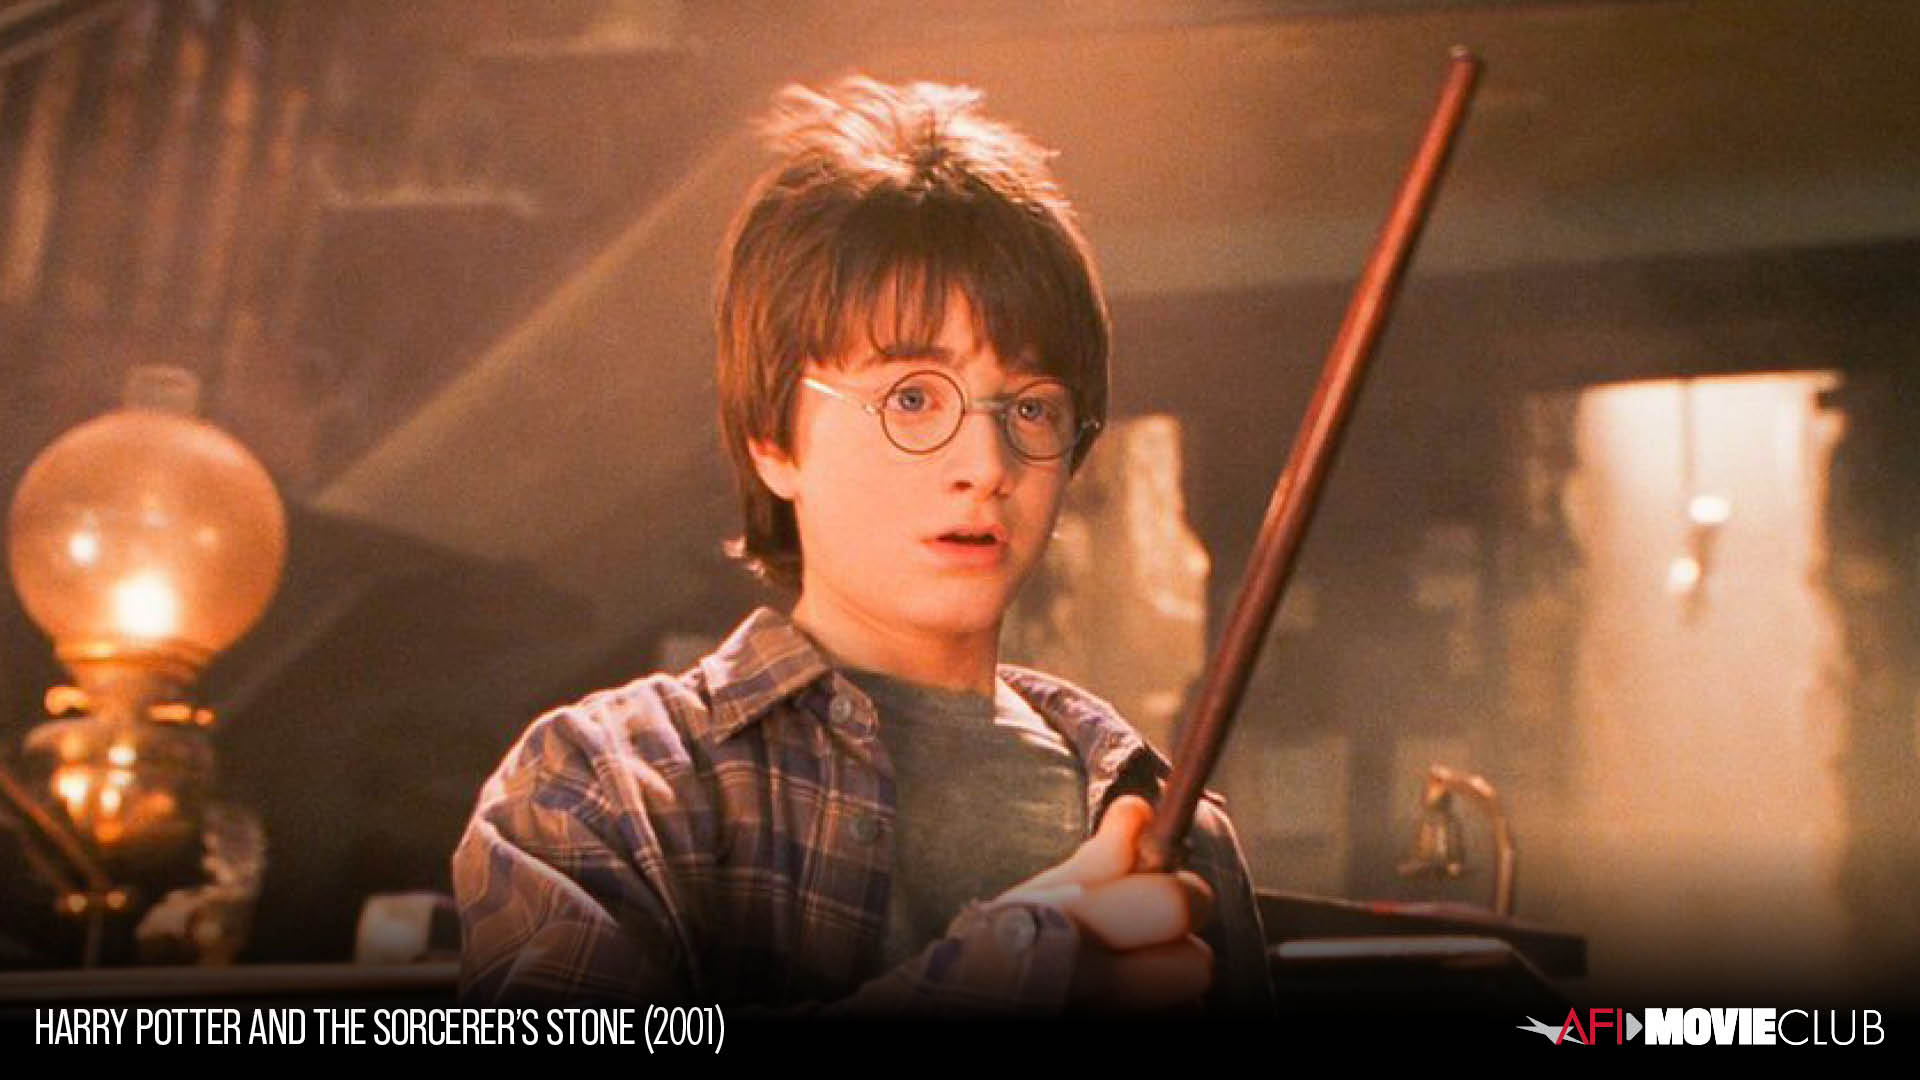 Harry Potter and the Sorcerer's Stone Film Still - Daniel Radcliffe